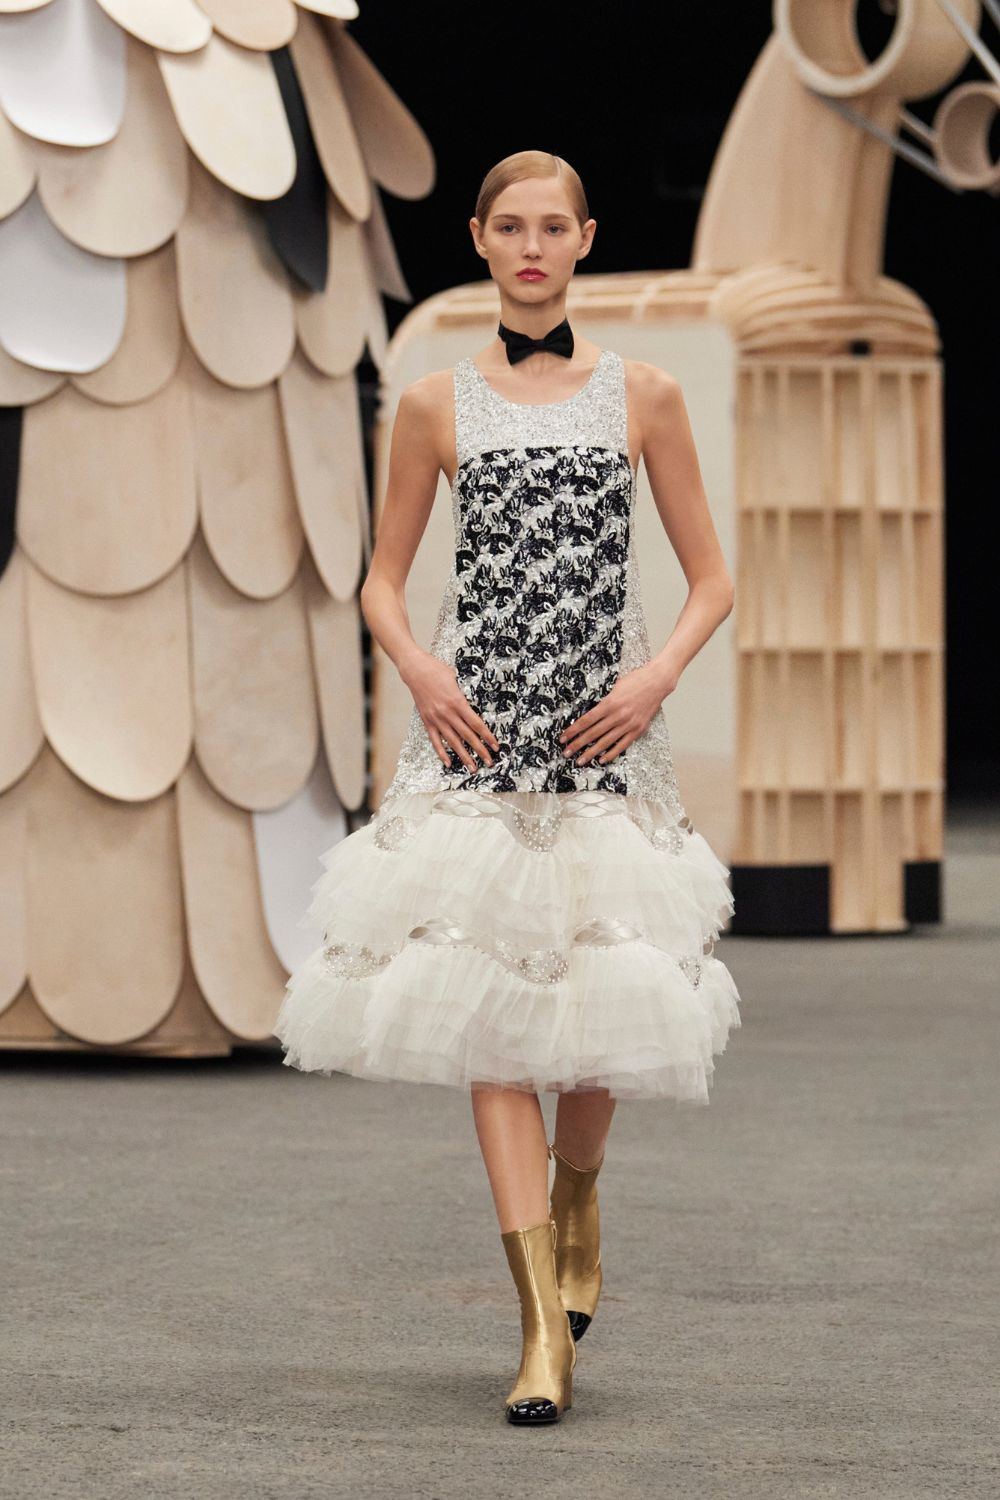 Chanel Conjures Fantastic Animals In Playful Couture Show – WWD